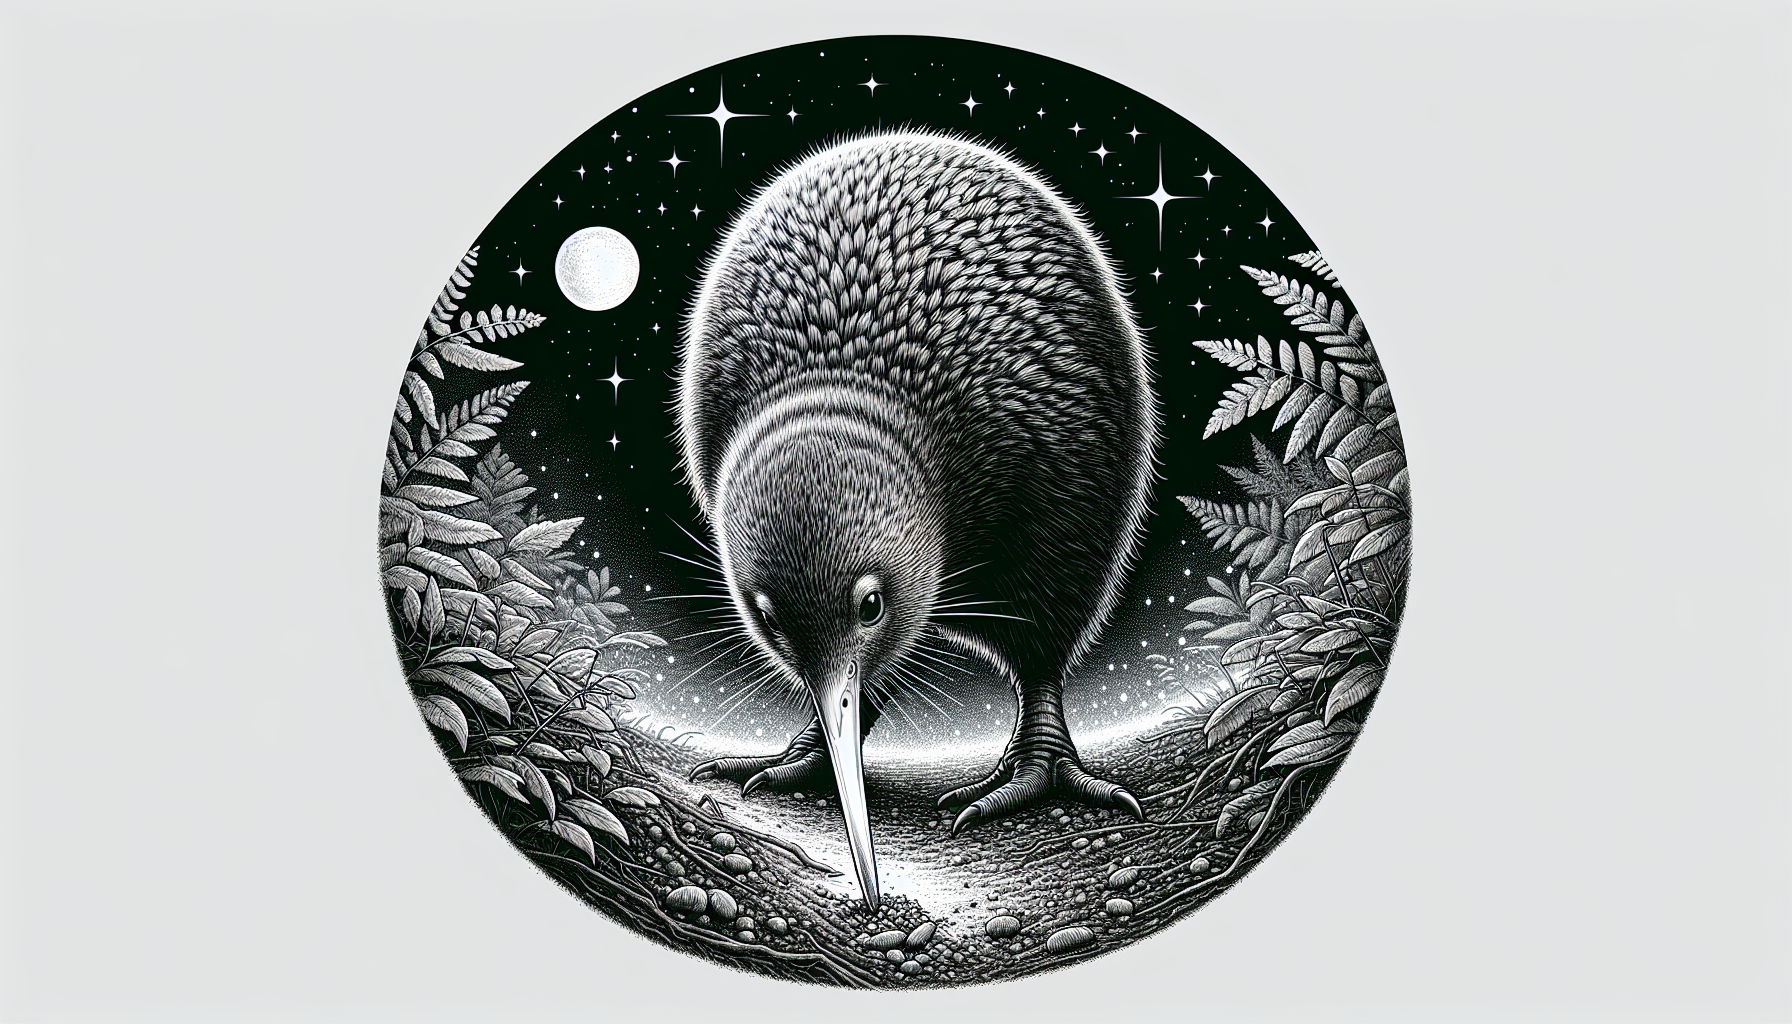 Illustration of a kiwi bird foraging at night using its keen sense of smell